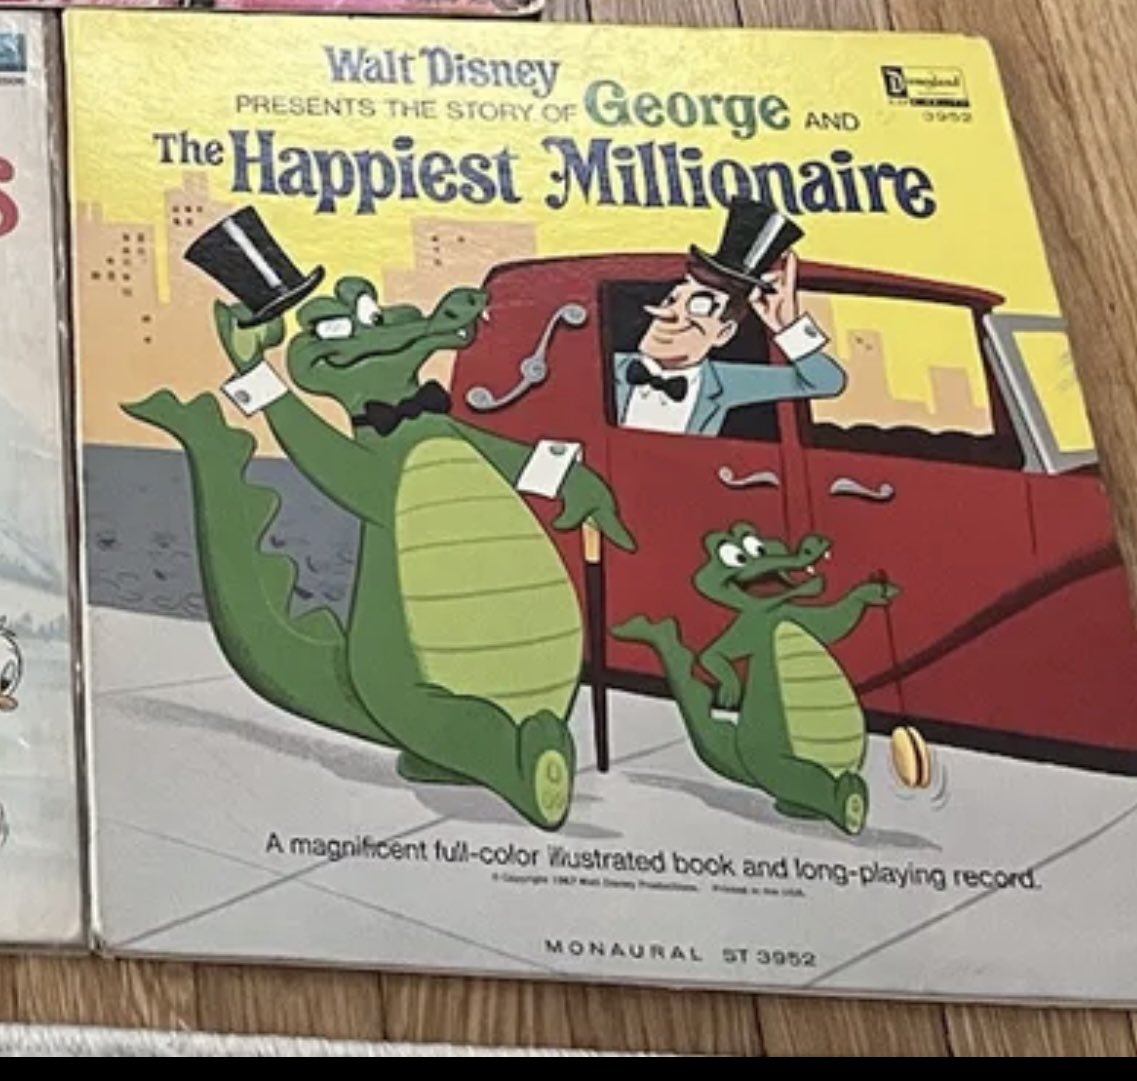 Walt Disney presents the story of George and the Happiest Millionare.